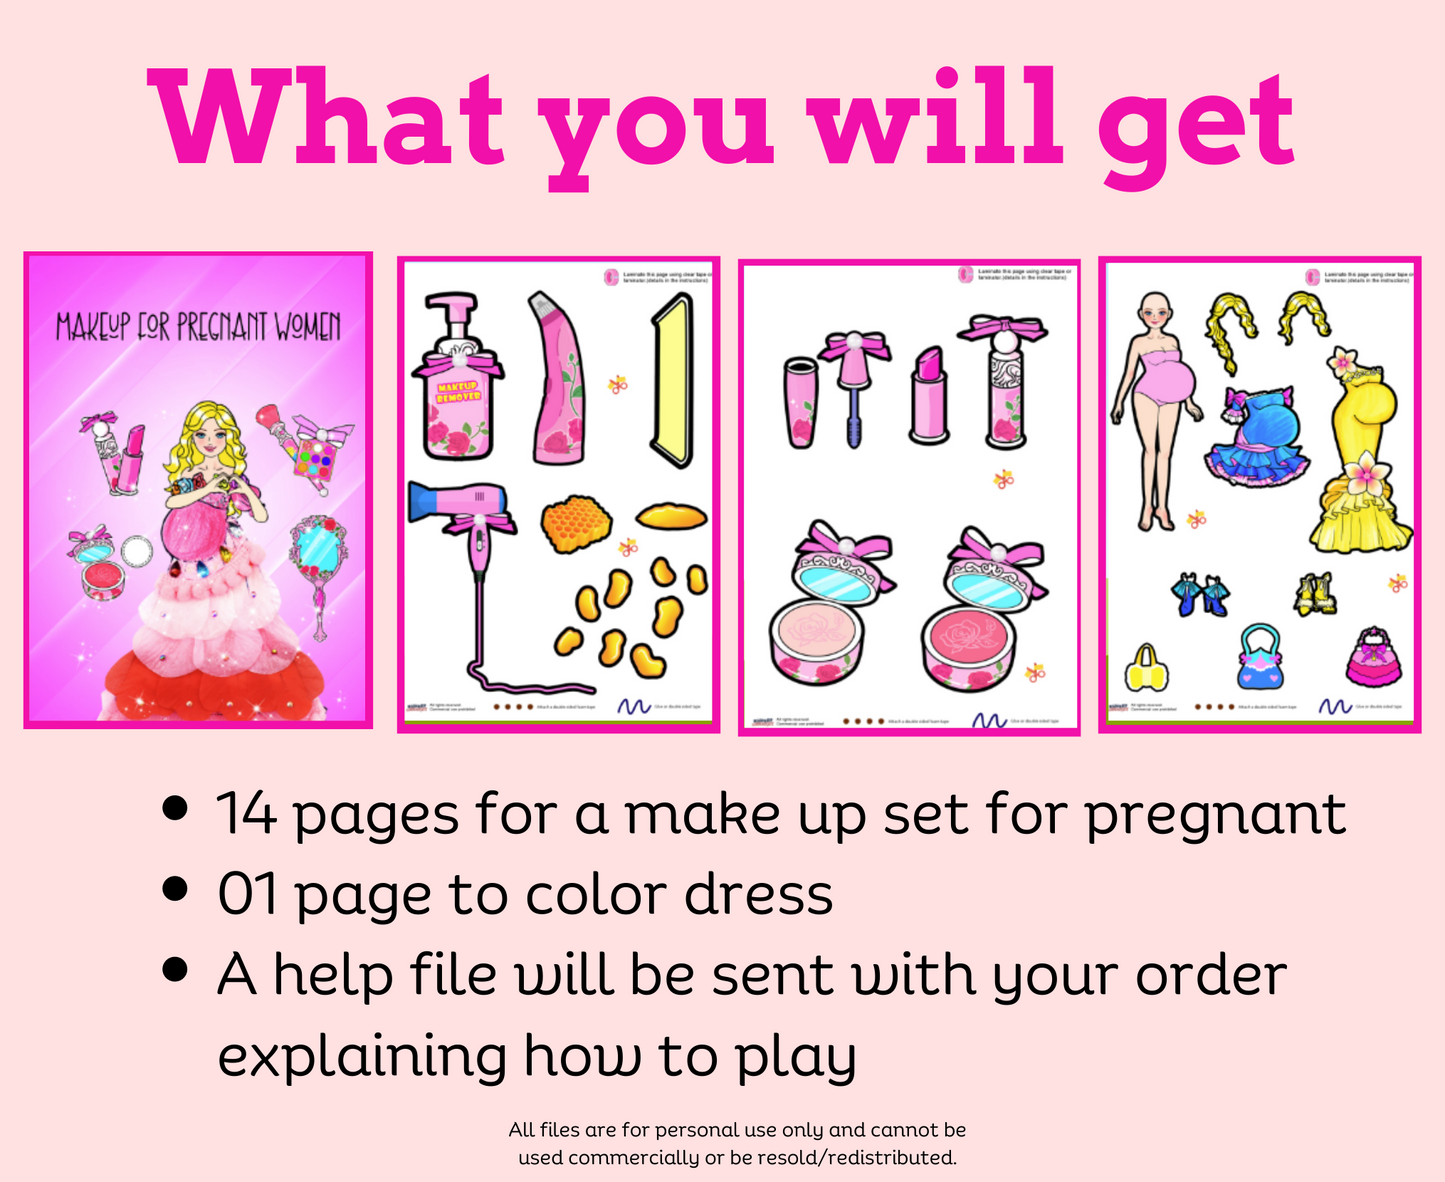 Barbie pregnant makeup kit printables 💖 DIY kit for your little one - Paper doll house - Activity book for kids 💖 Woa Doll Crafts